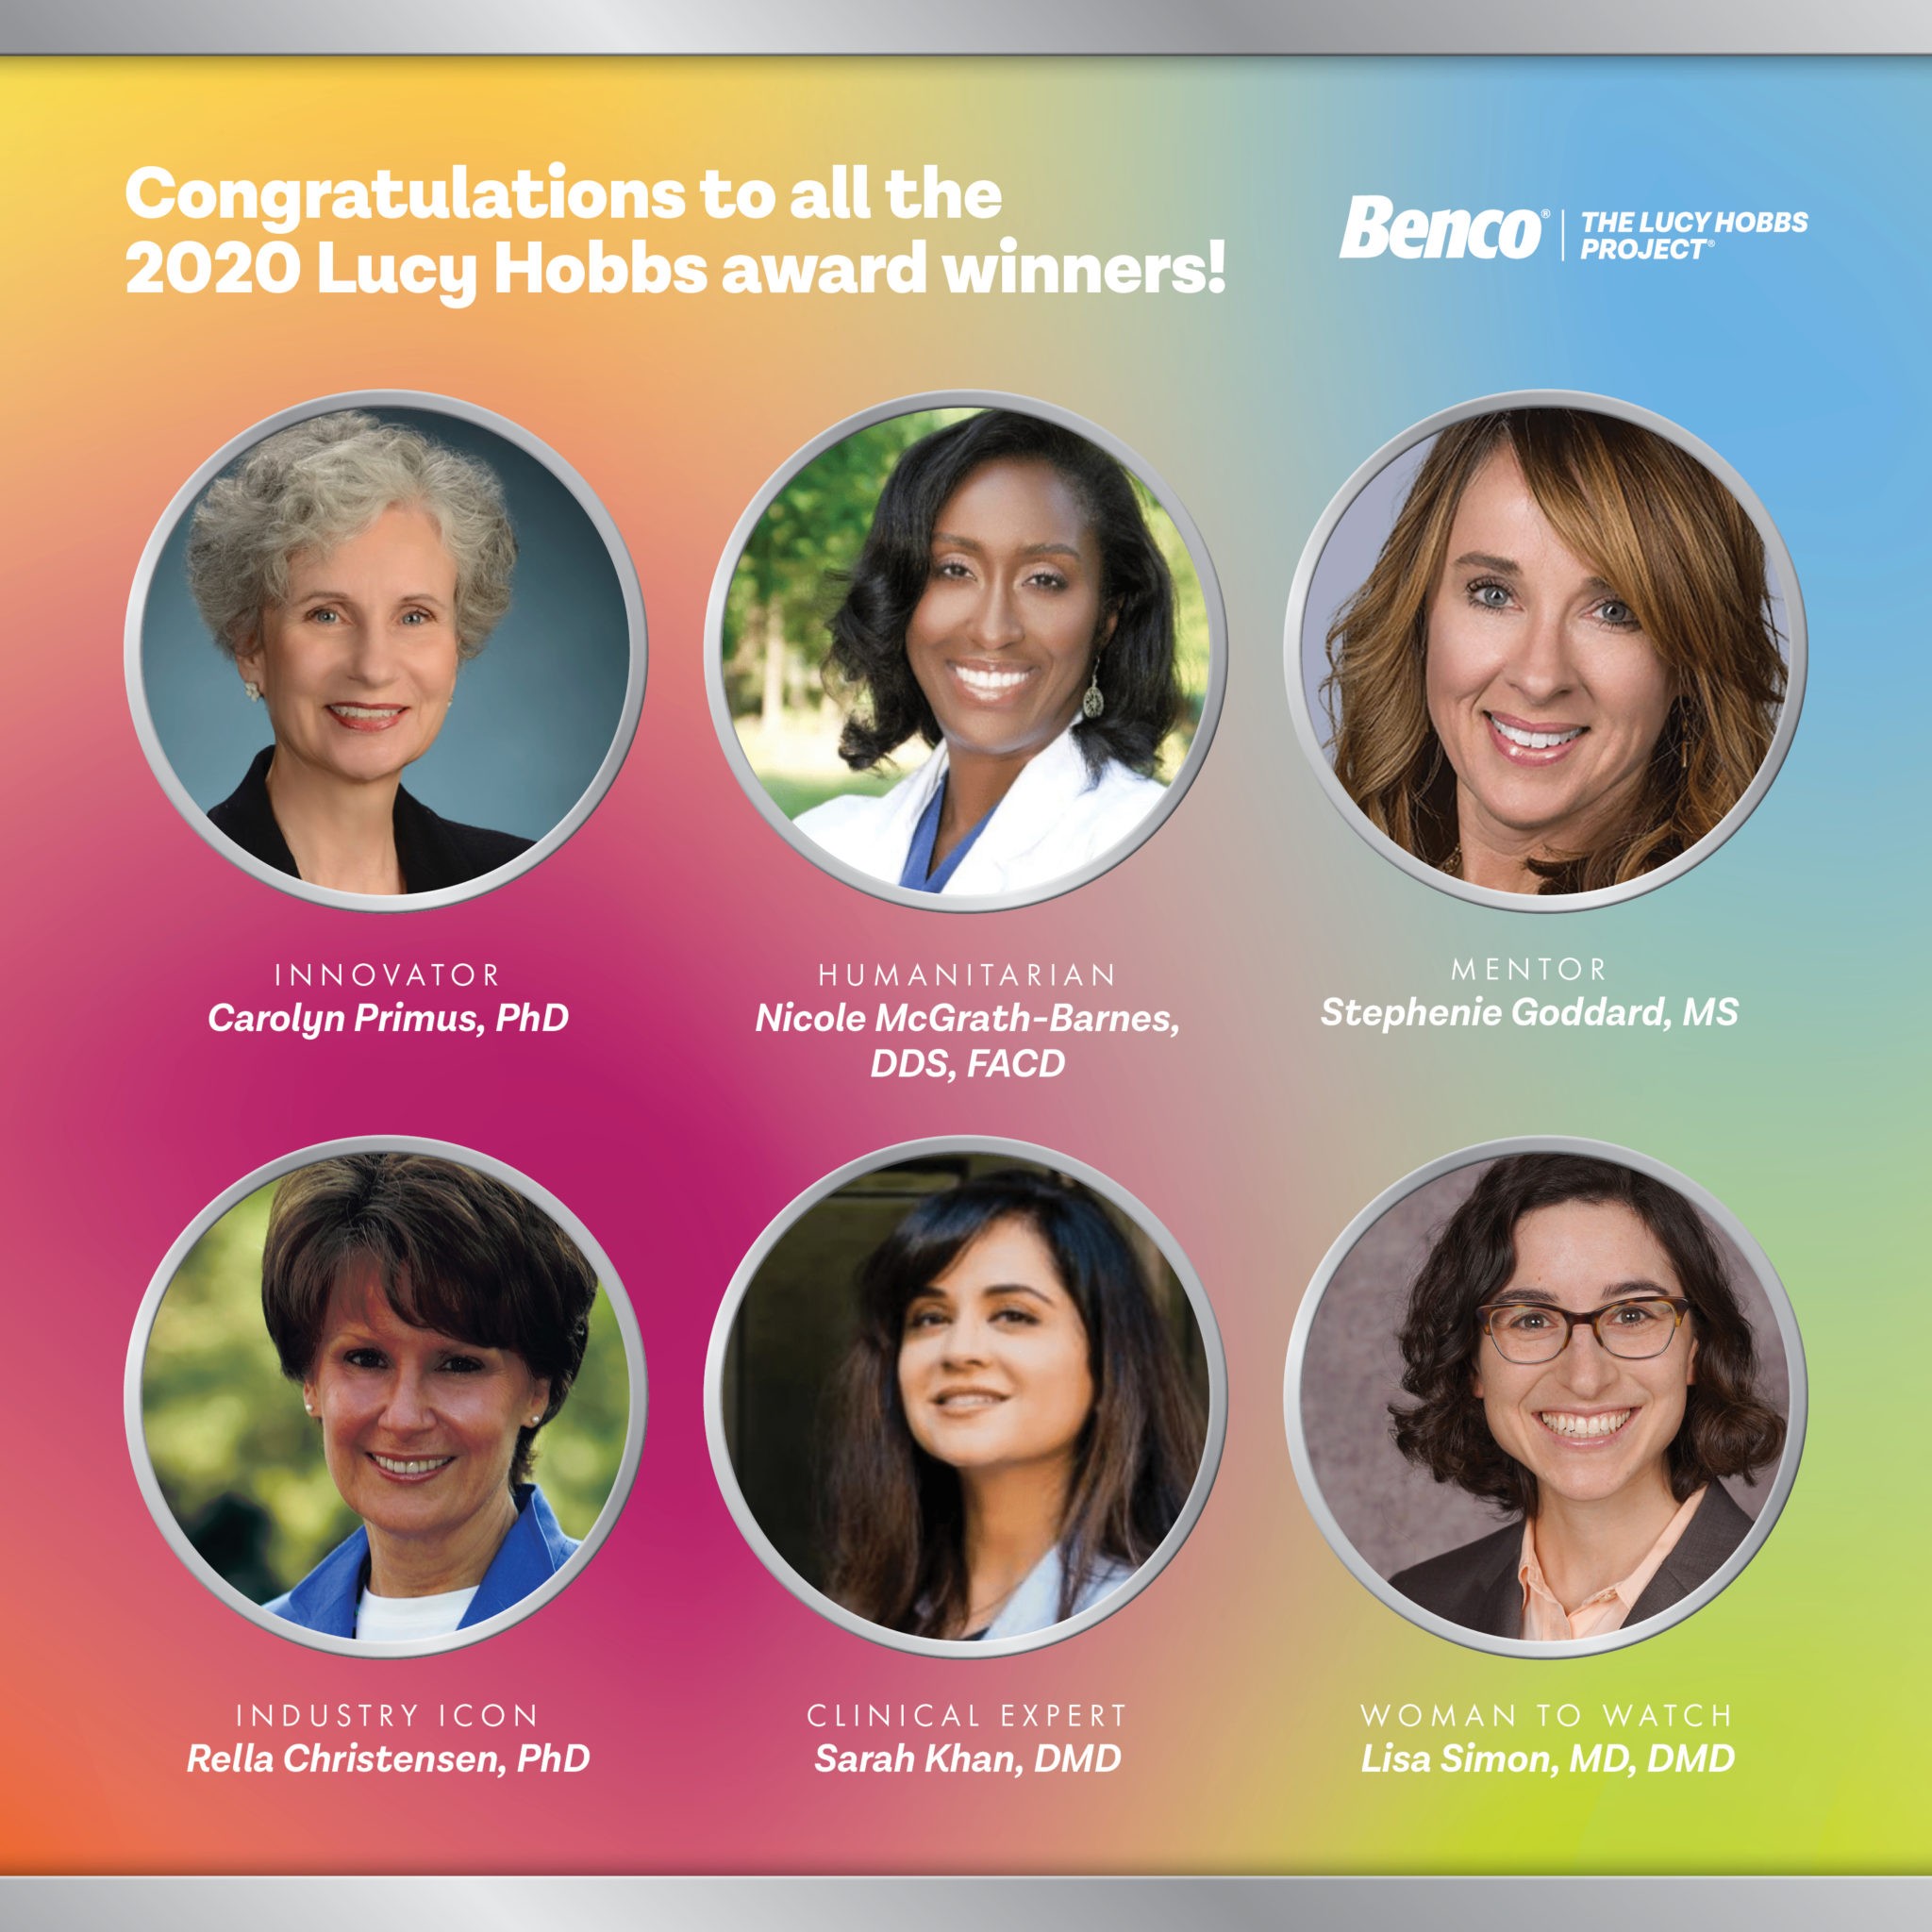 Six Lucy Hobbs Project Award recipients for 2020